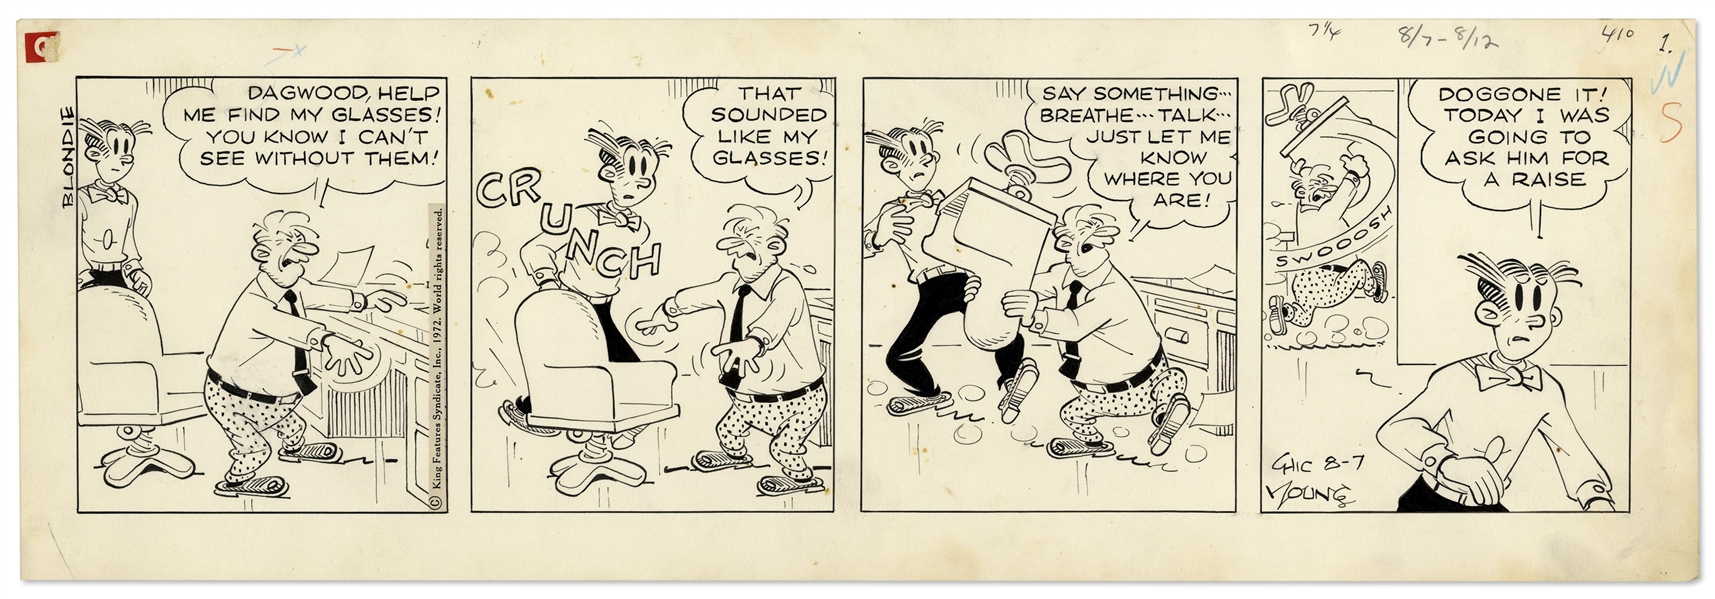 2 Chic Young Hand-Drawn ''Blondie'' Comic Strips From 1972 & 1973 -- With Chic Young's Original Artwork for One